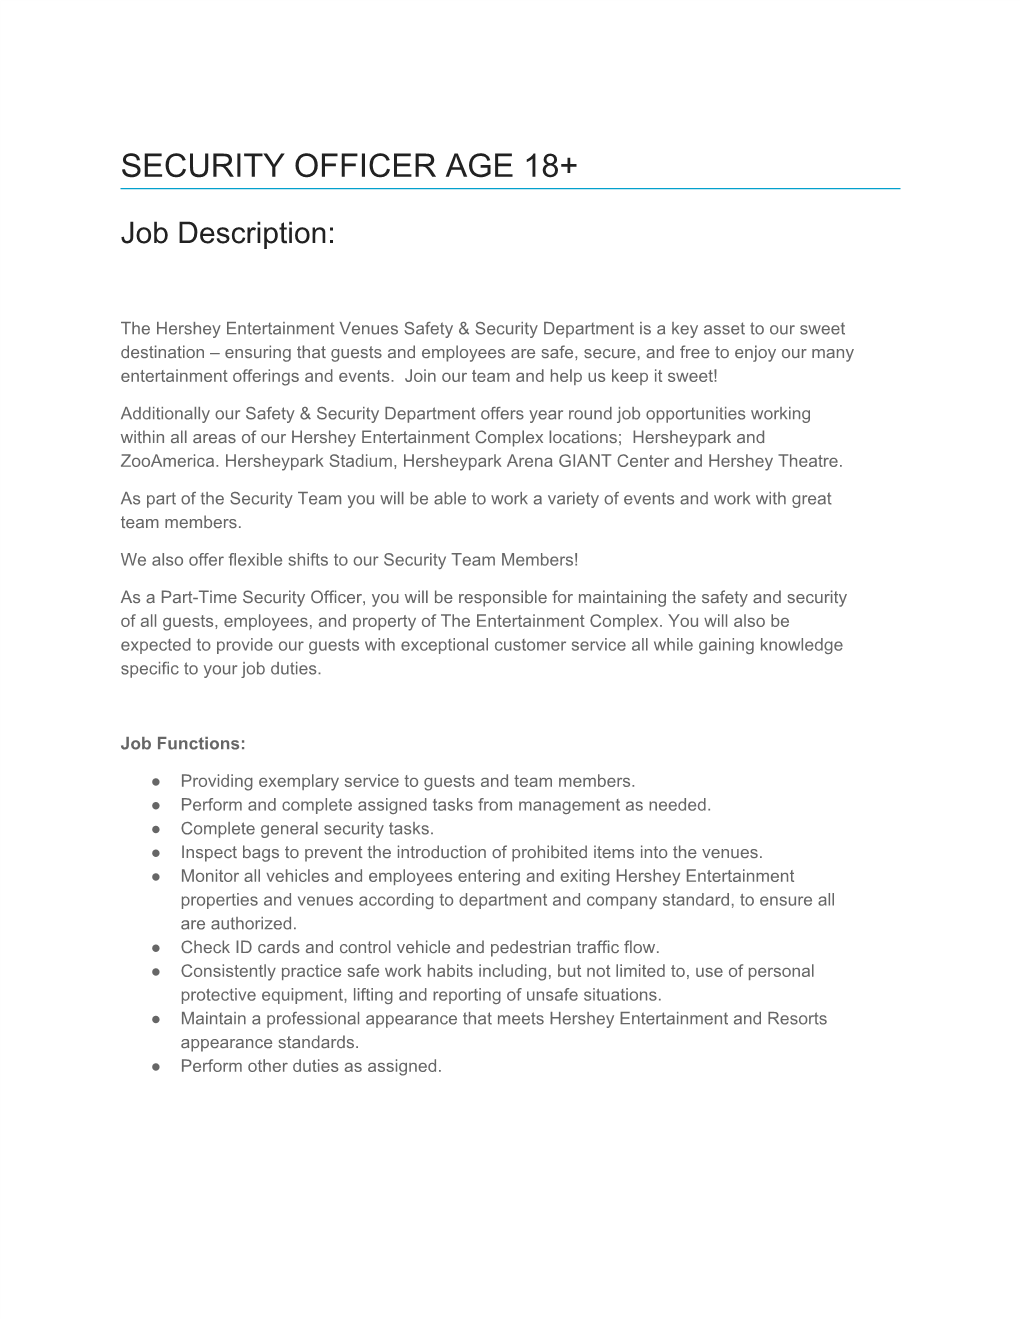 Security Officer Age 18+